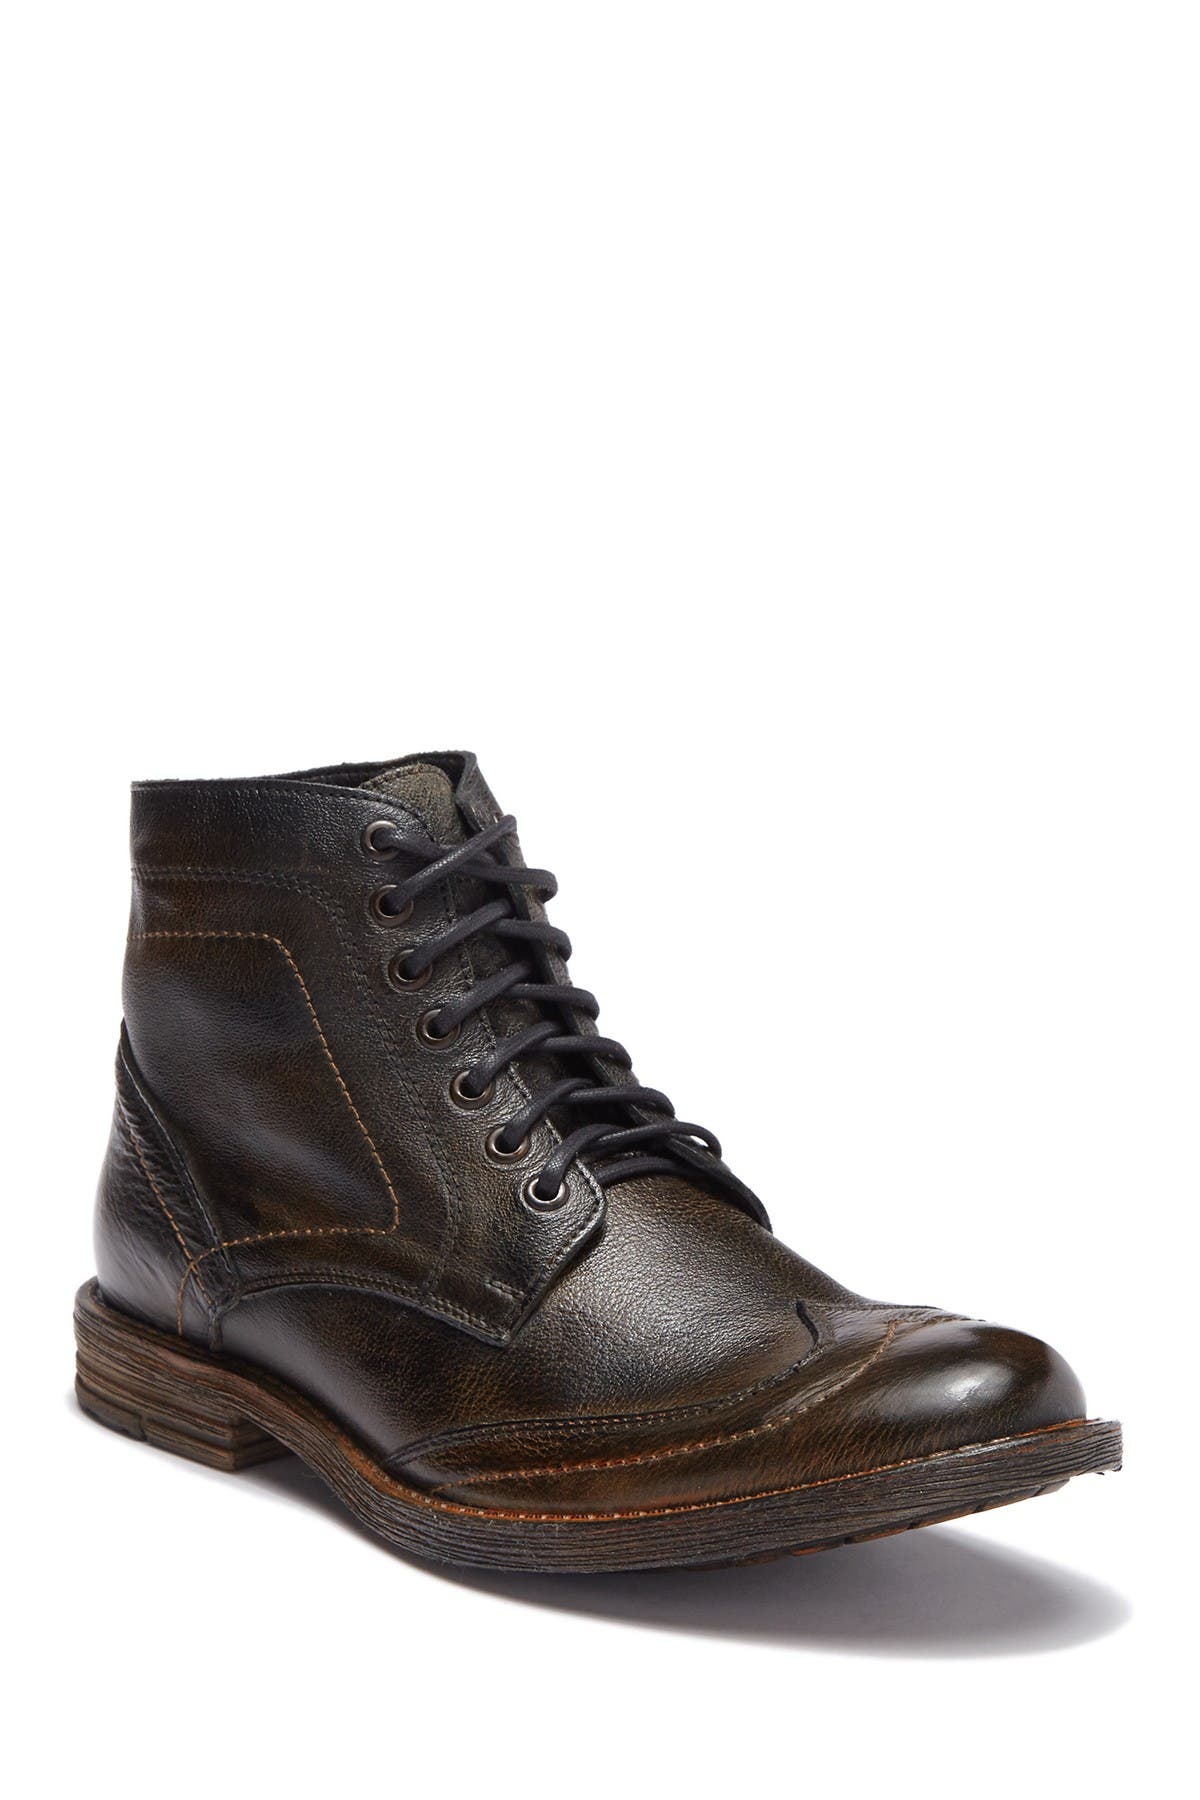 roan outlaw boot